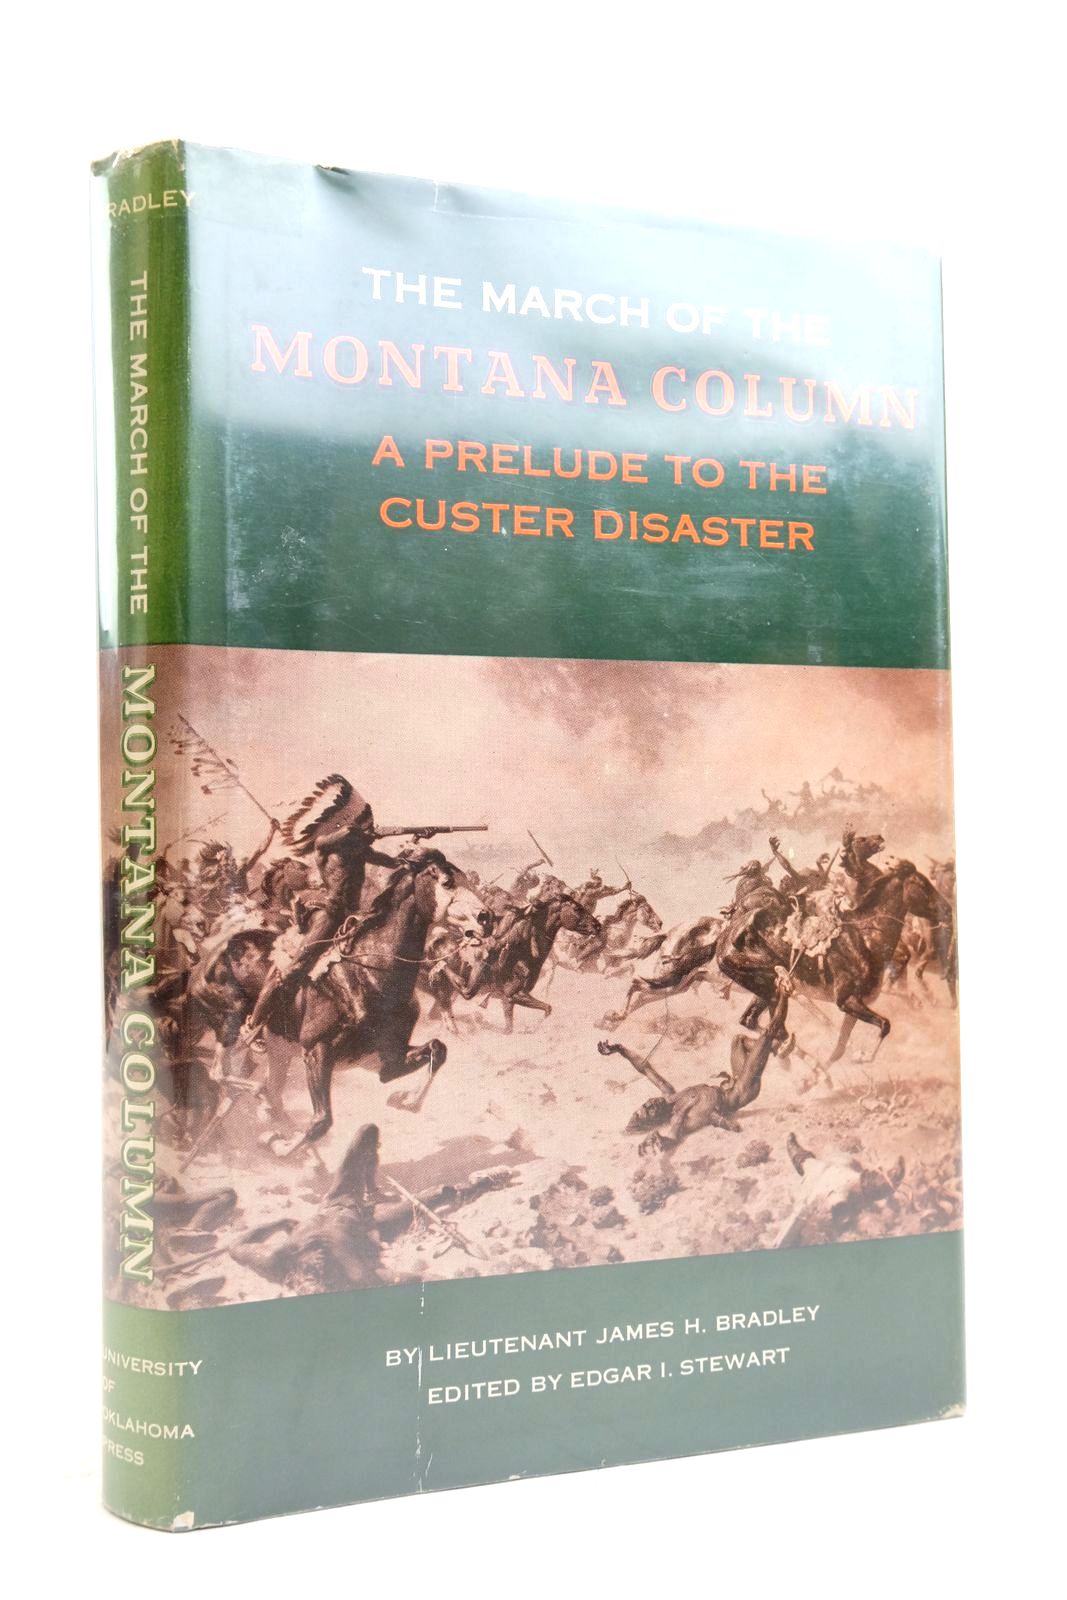 Photo of THE MARCH OF THE MONTANA COLUMN written by Bradley, James H. Stewart, Edgar I. published by University of Oklahoma Press (STOCK CODE: 2135387)  for sale by Stella & Rose's Books